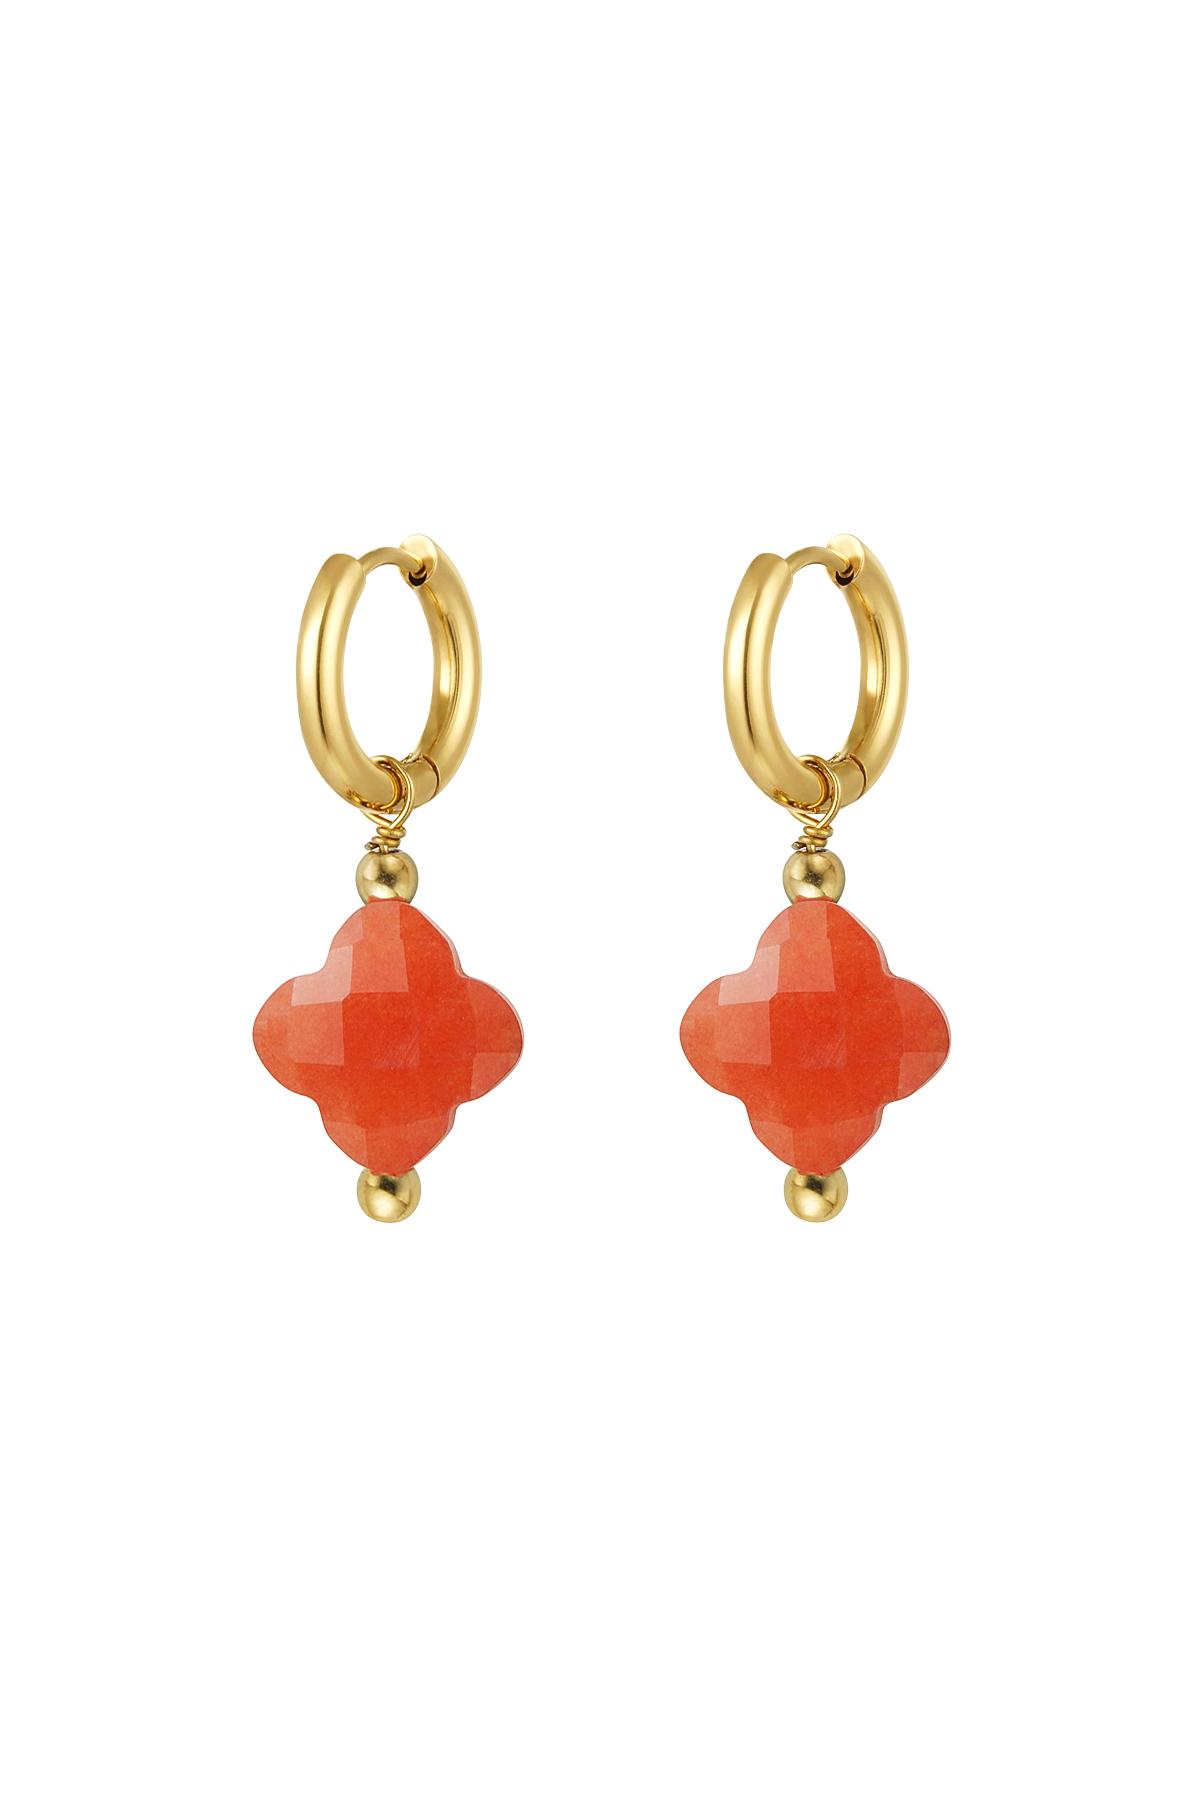 Earrings clover color - Natural stones collection Orange & Gold Stainless Steel 